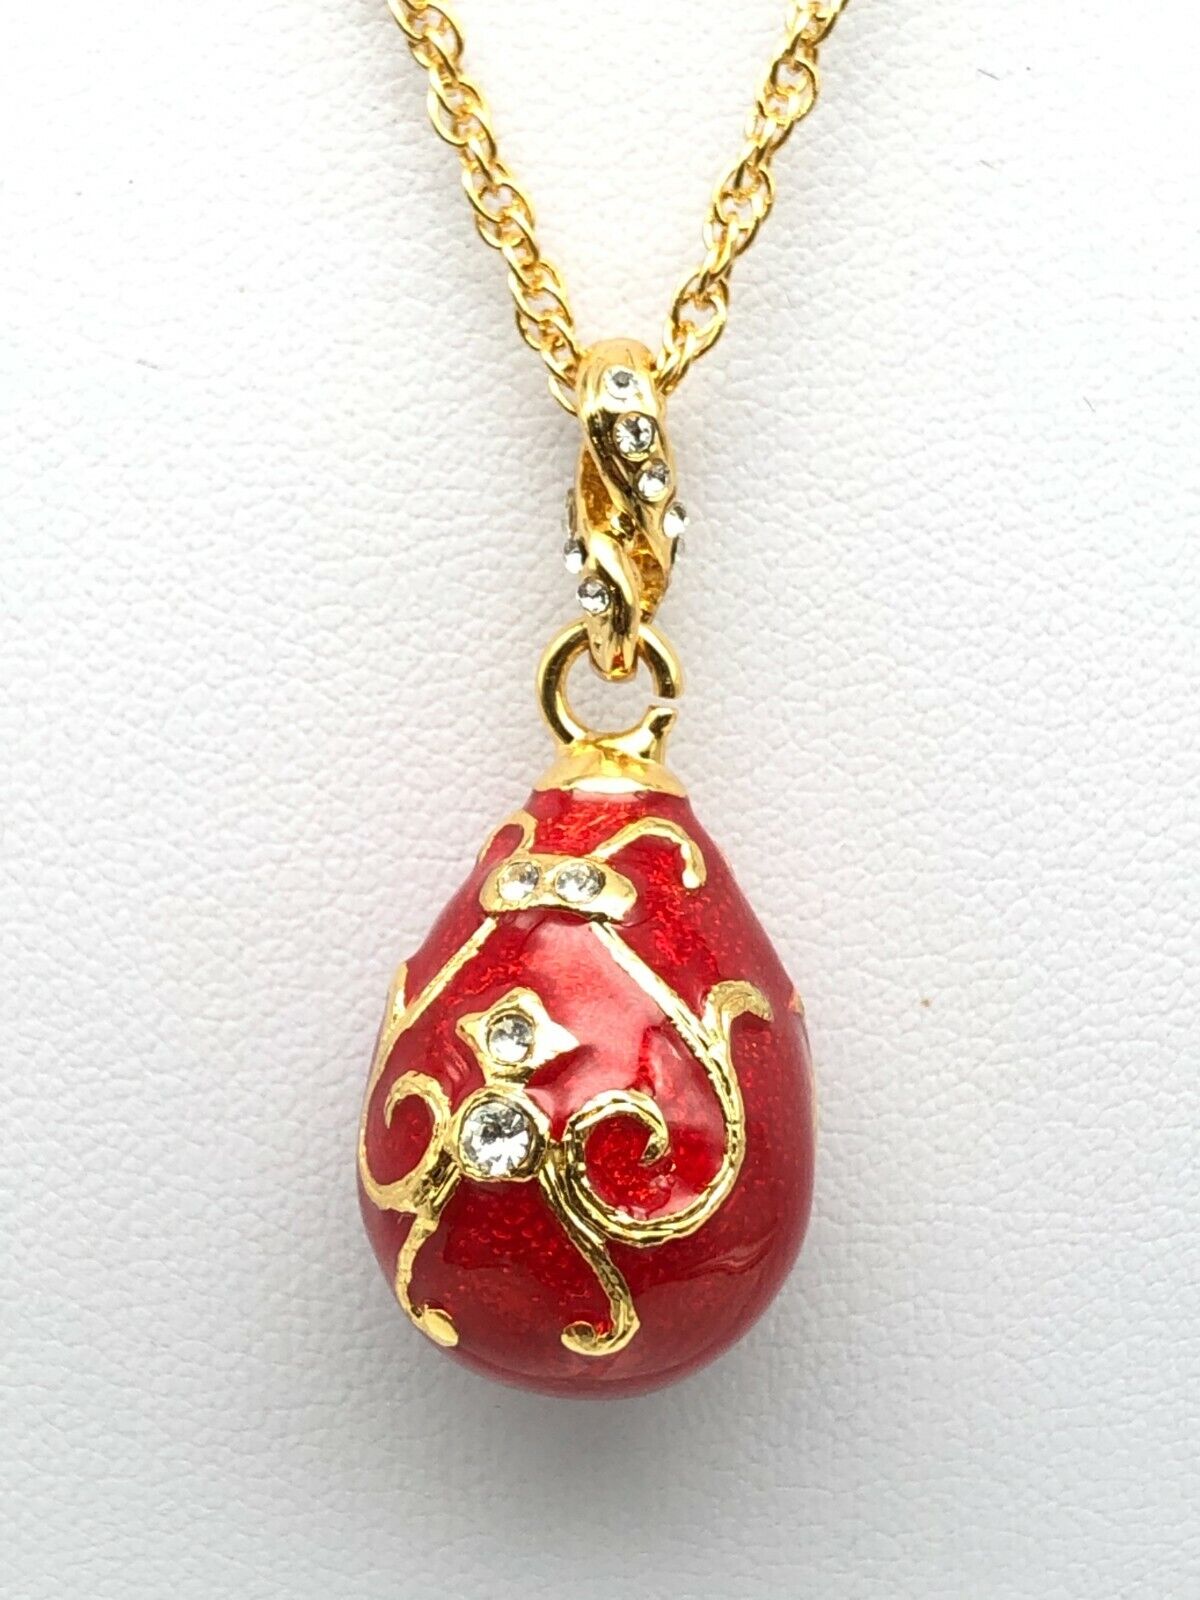 Red Egg Pendant Necklace with crystals by Keren Kopal